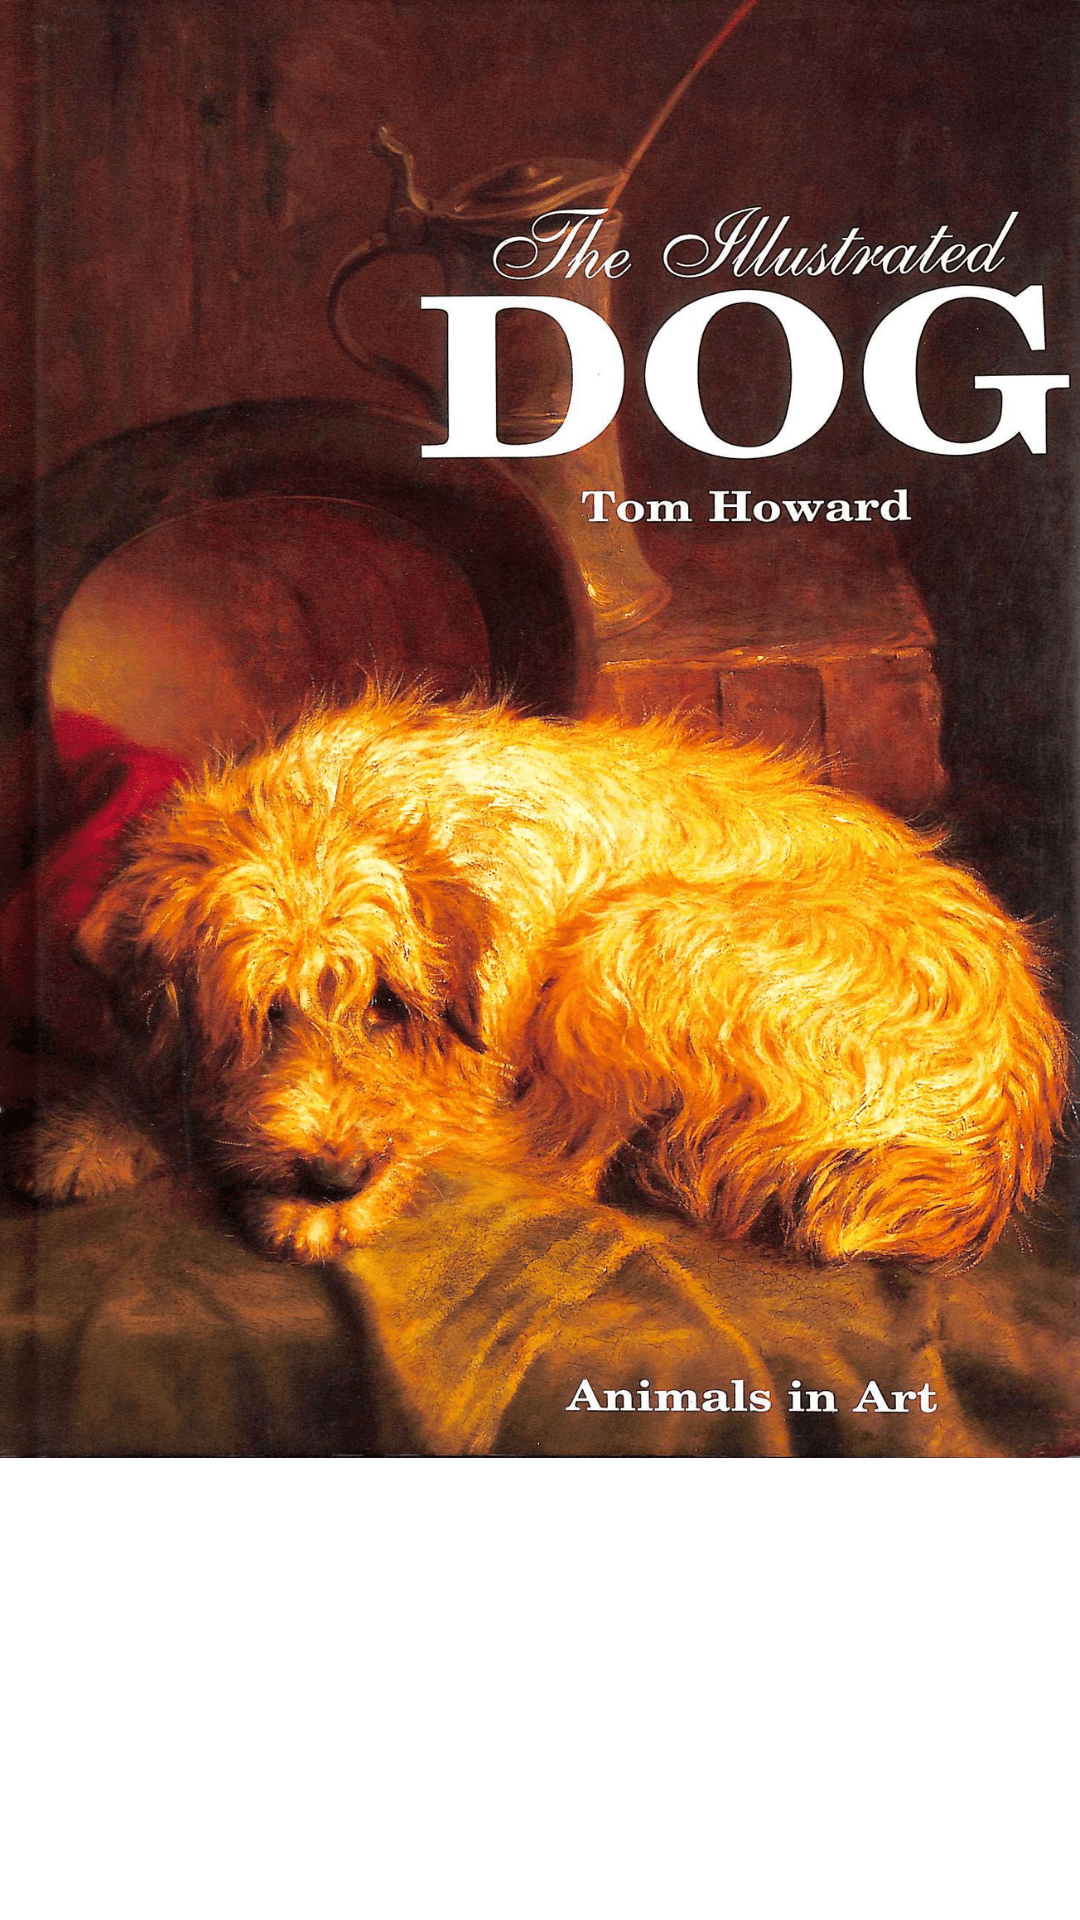 The Illustrated Dog by Tom Howard